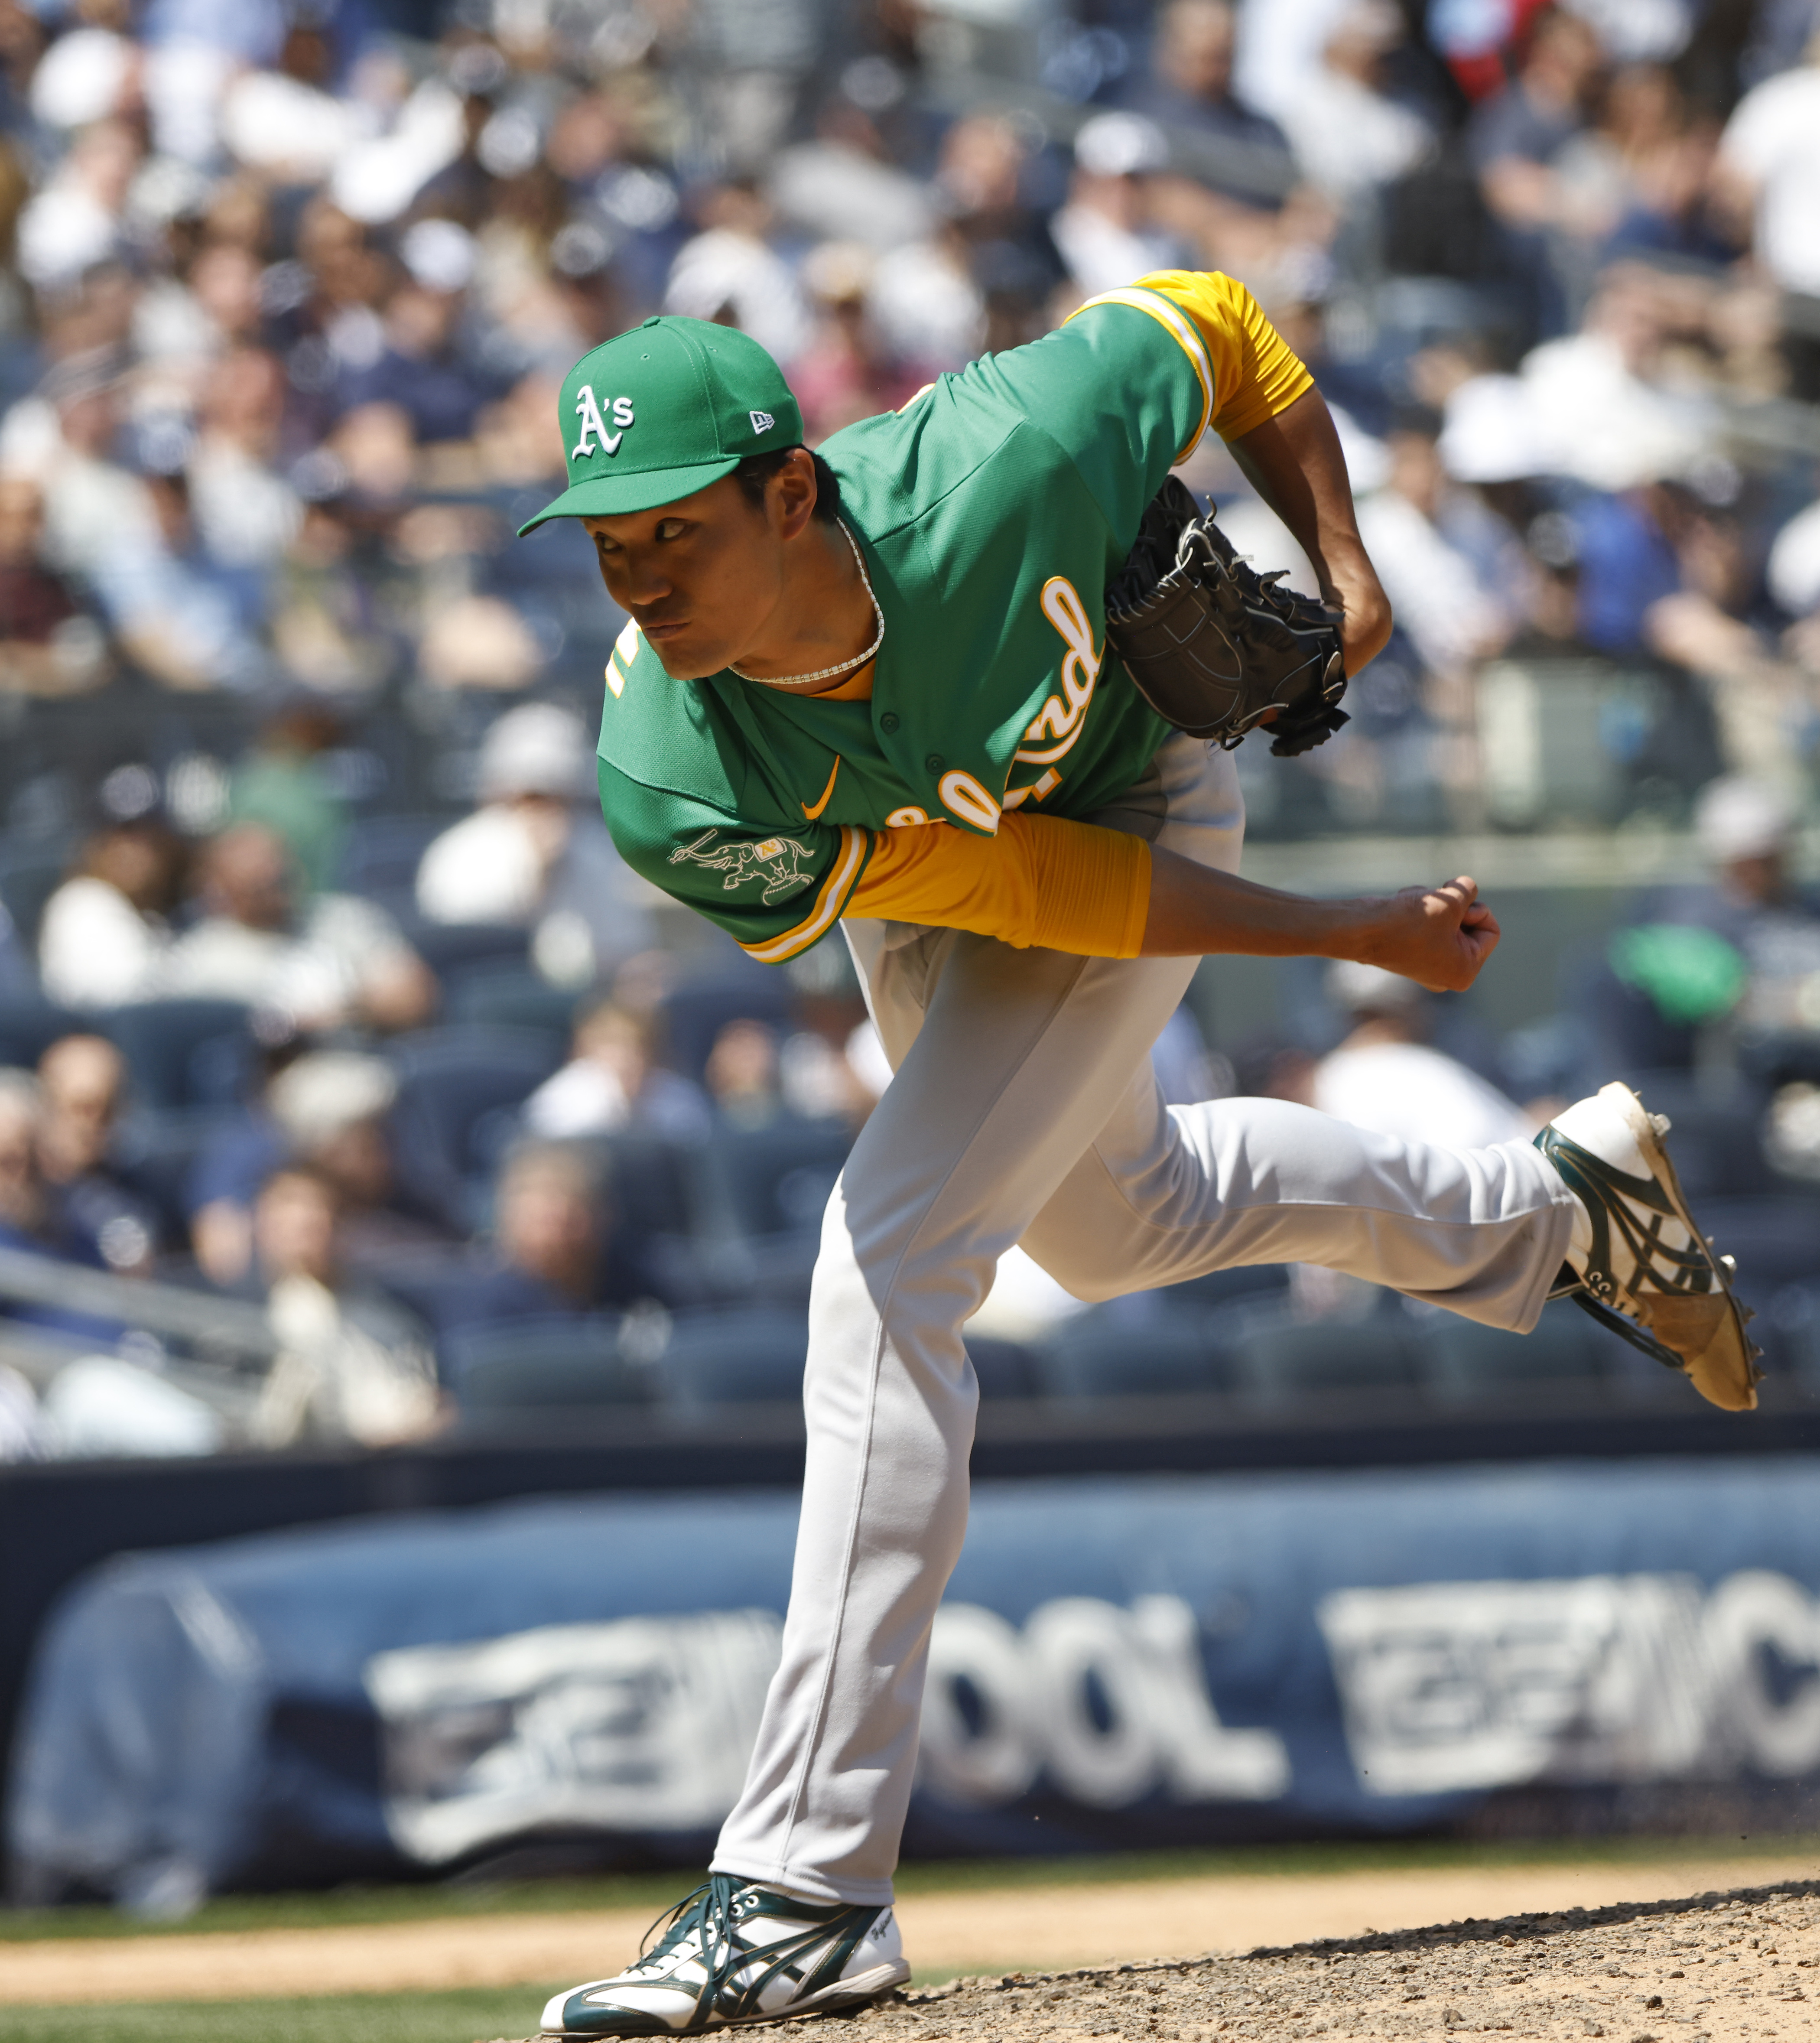 Shintaro Fujinami #11 of the Oakland Athletics throwing a pitch during a baseball game between the Athletics and New York Yankees.